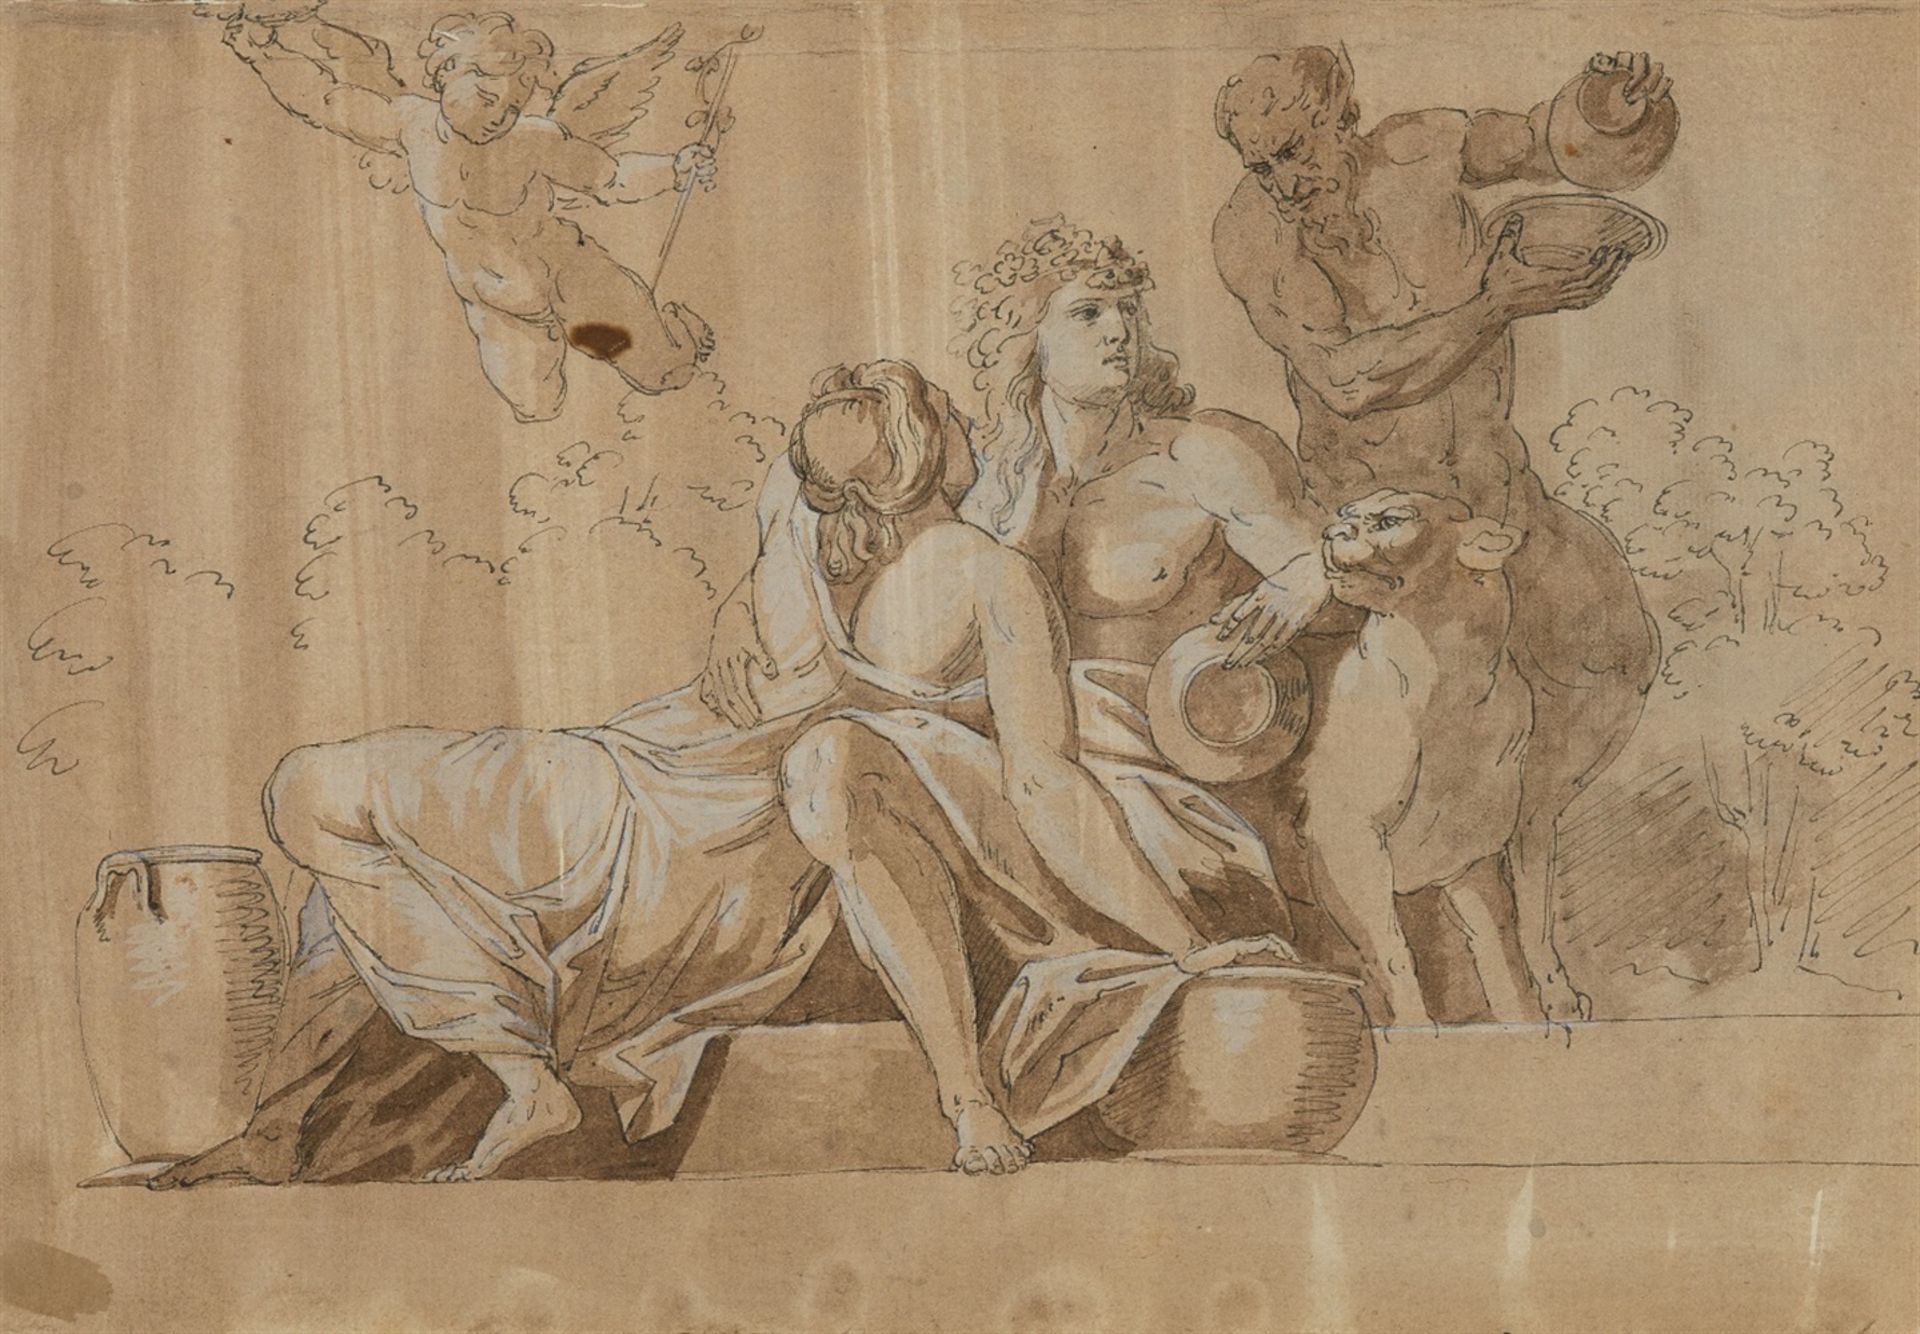 Probably french school 18th centuryBacchus and a Nymph embracing with Pan and CupidGrey ink, brown